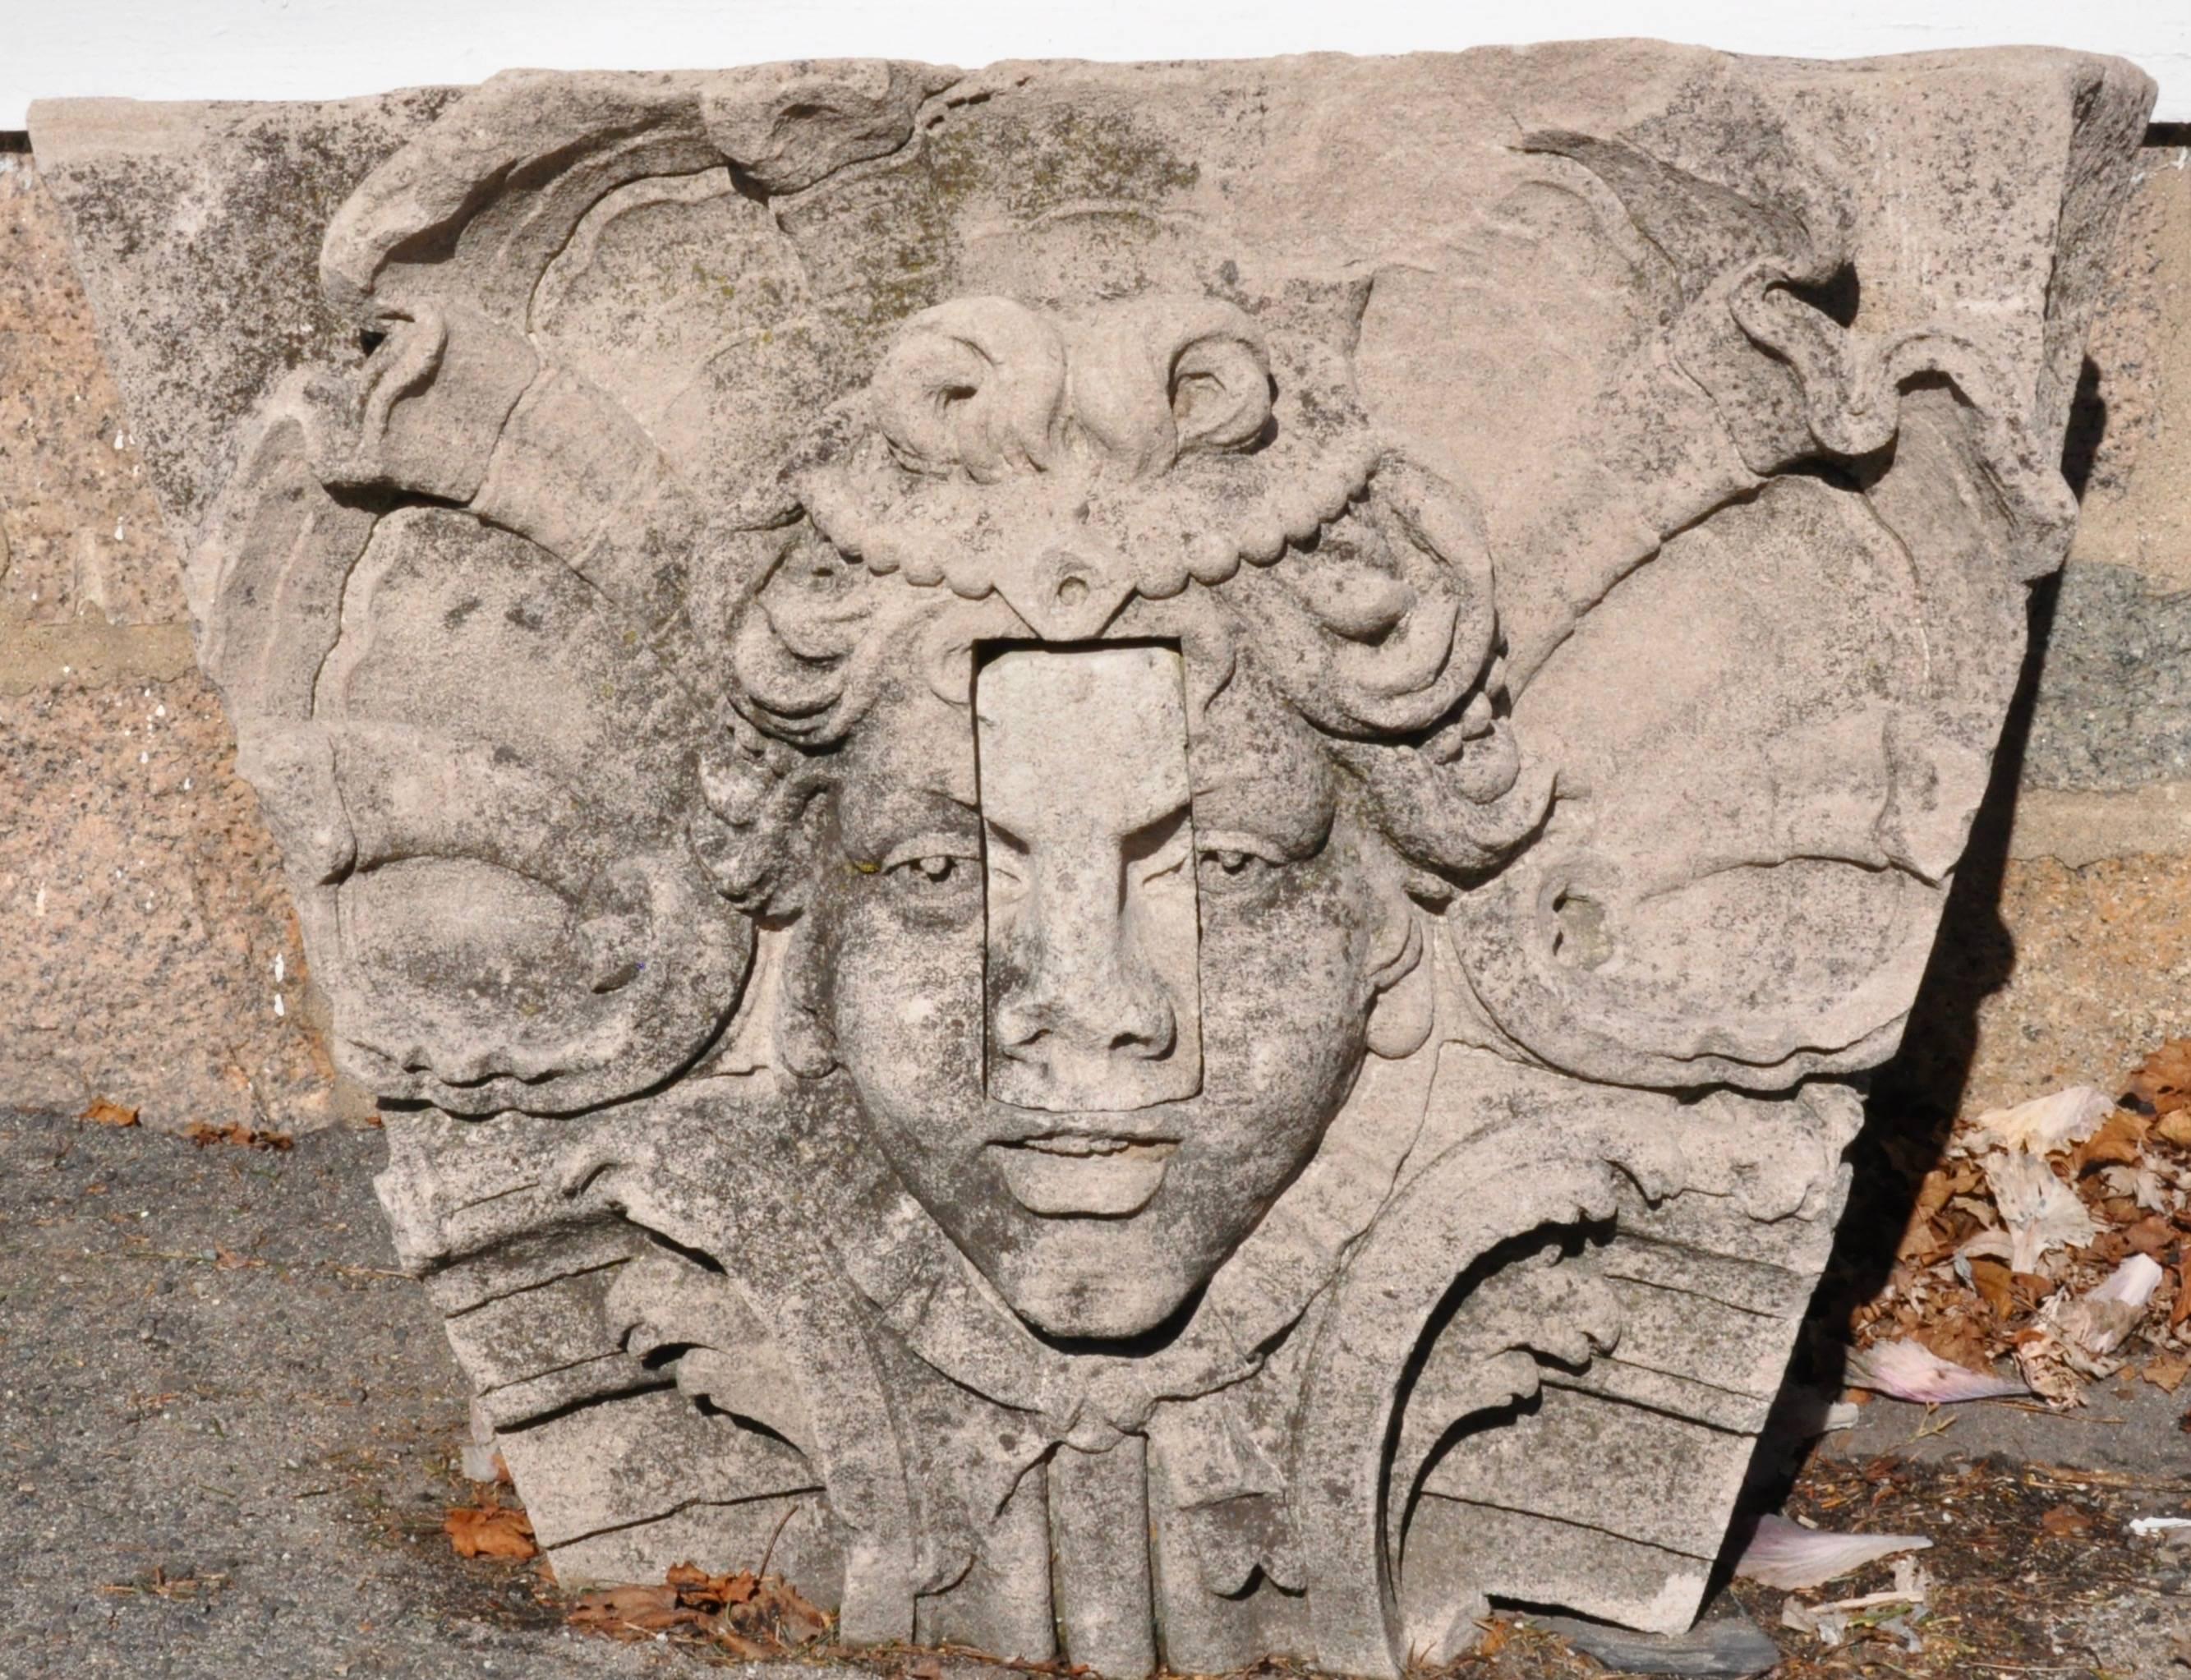 Large Pair of Limestone Keystones from Chetwode, Newport RI

--John Astor's Mansion for a time and demolished in 1973
--In the French Baroque Taste

A limestone-clad brick Louis XIV style château, Chetwode was built for Mrs. William Storrs